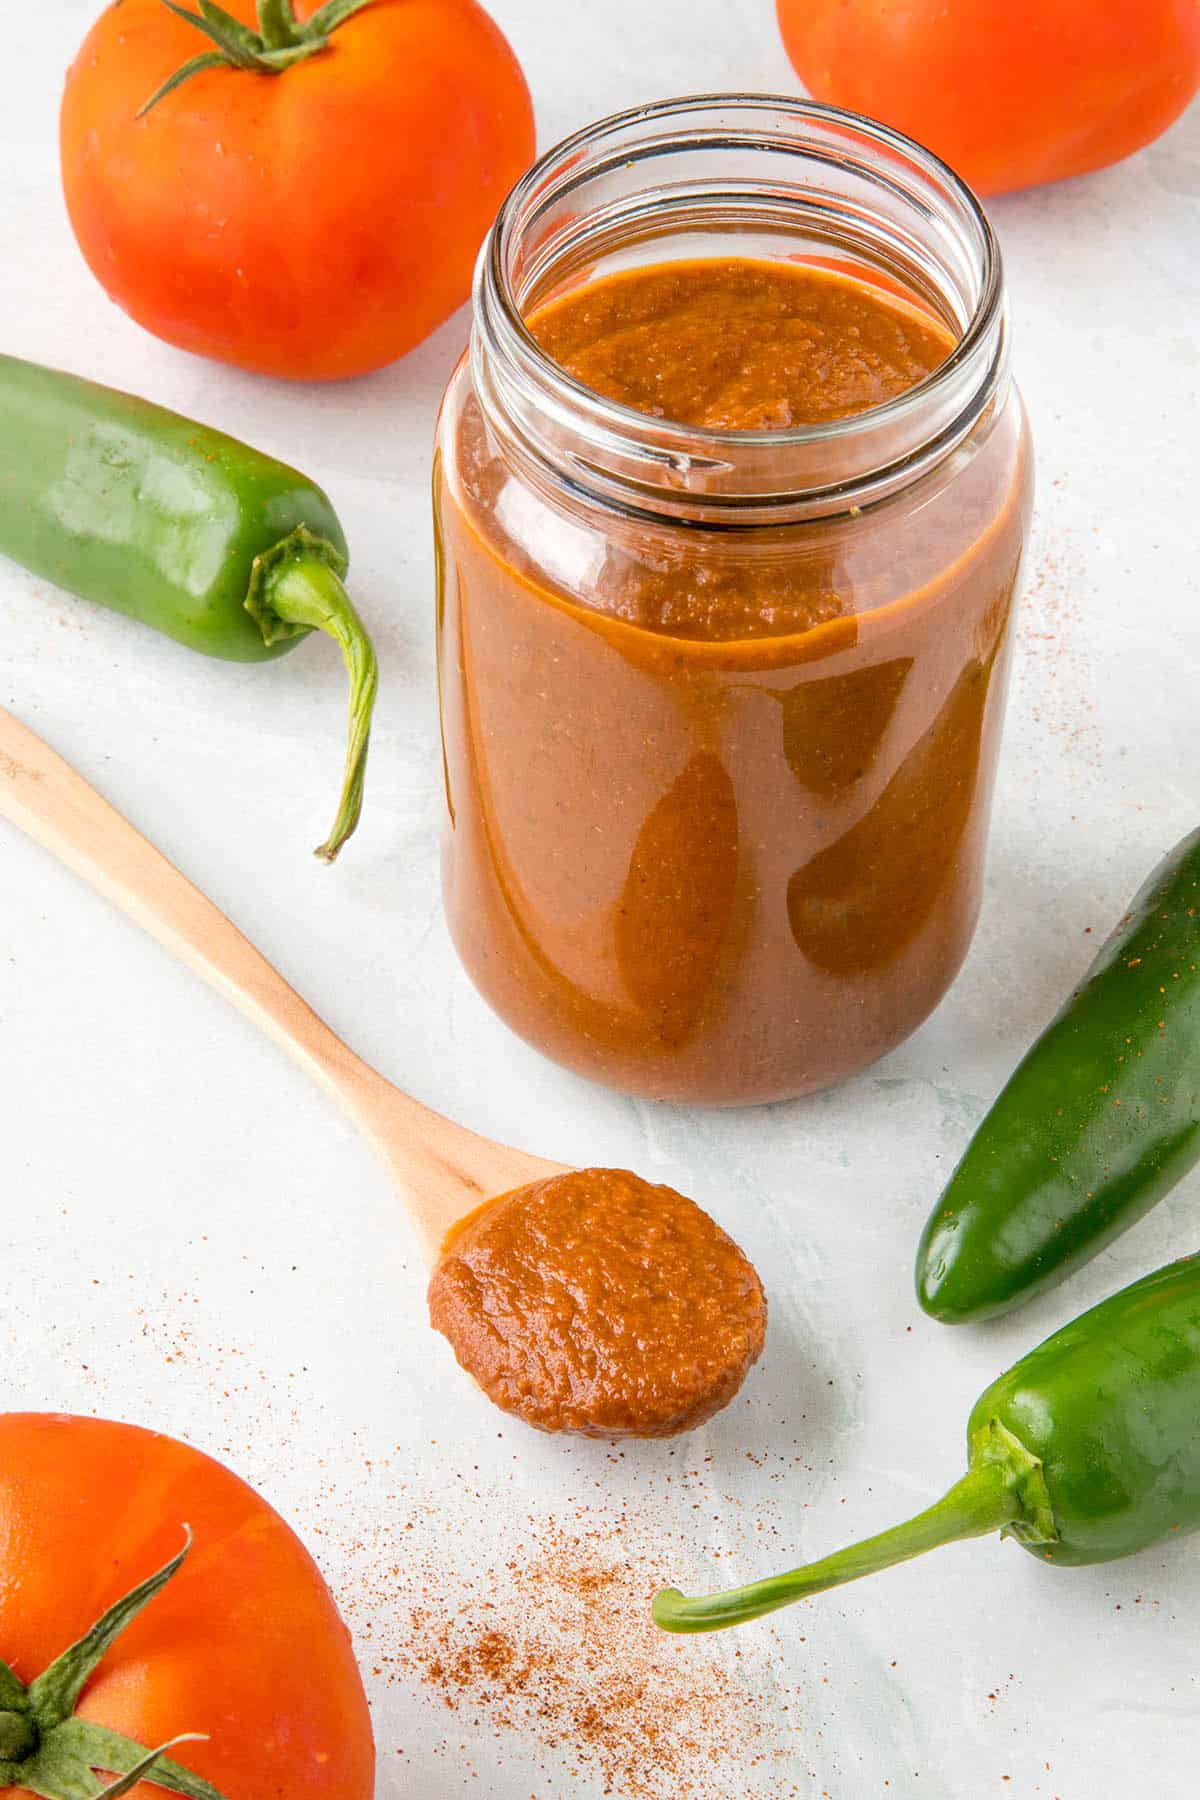 Ranchero Sauce in a jar, ready to serve